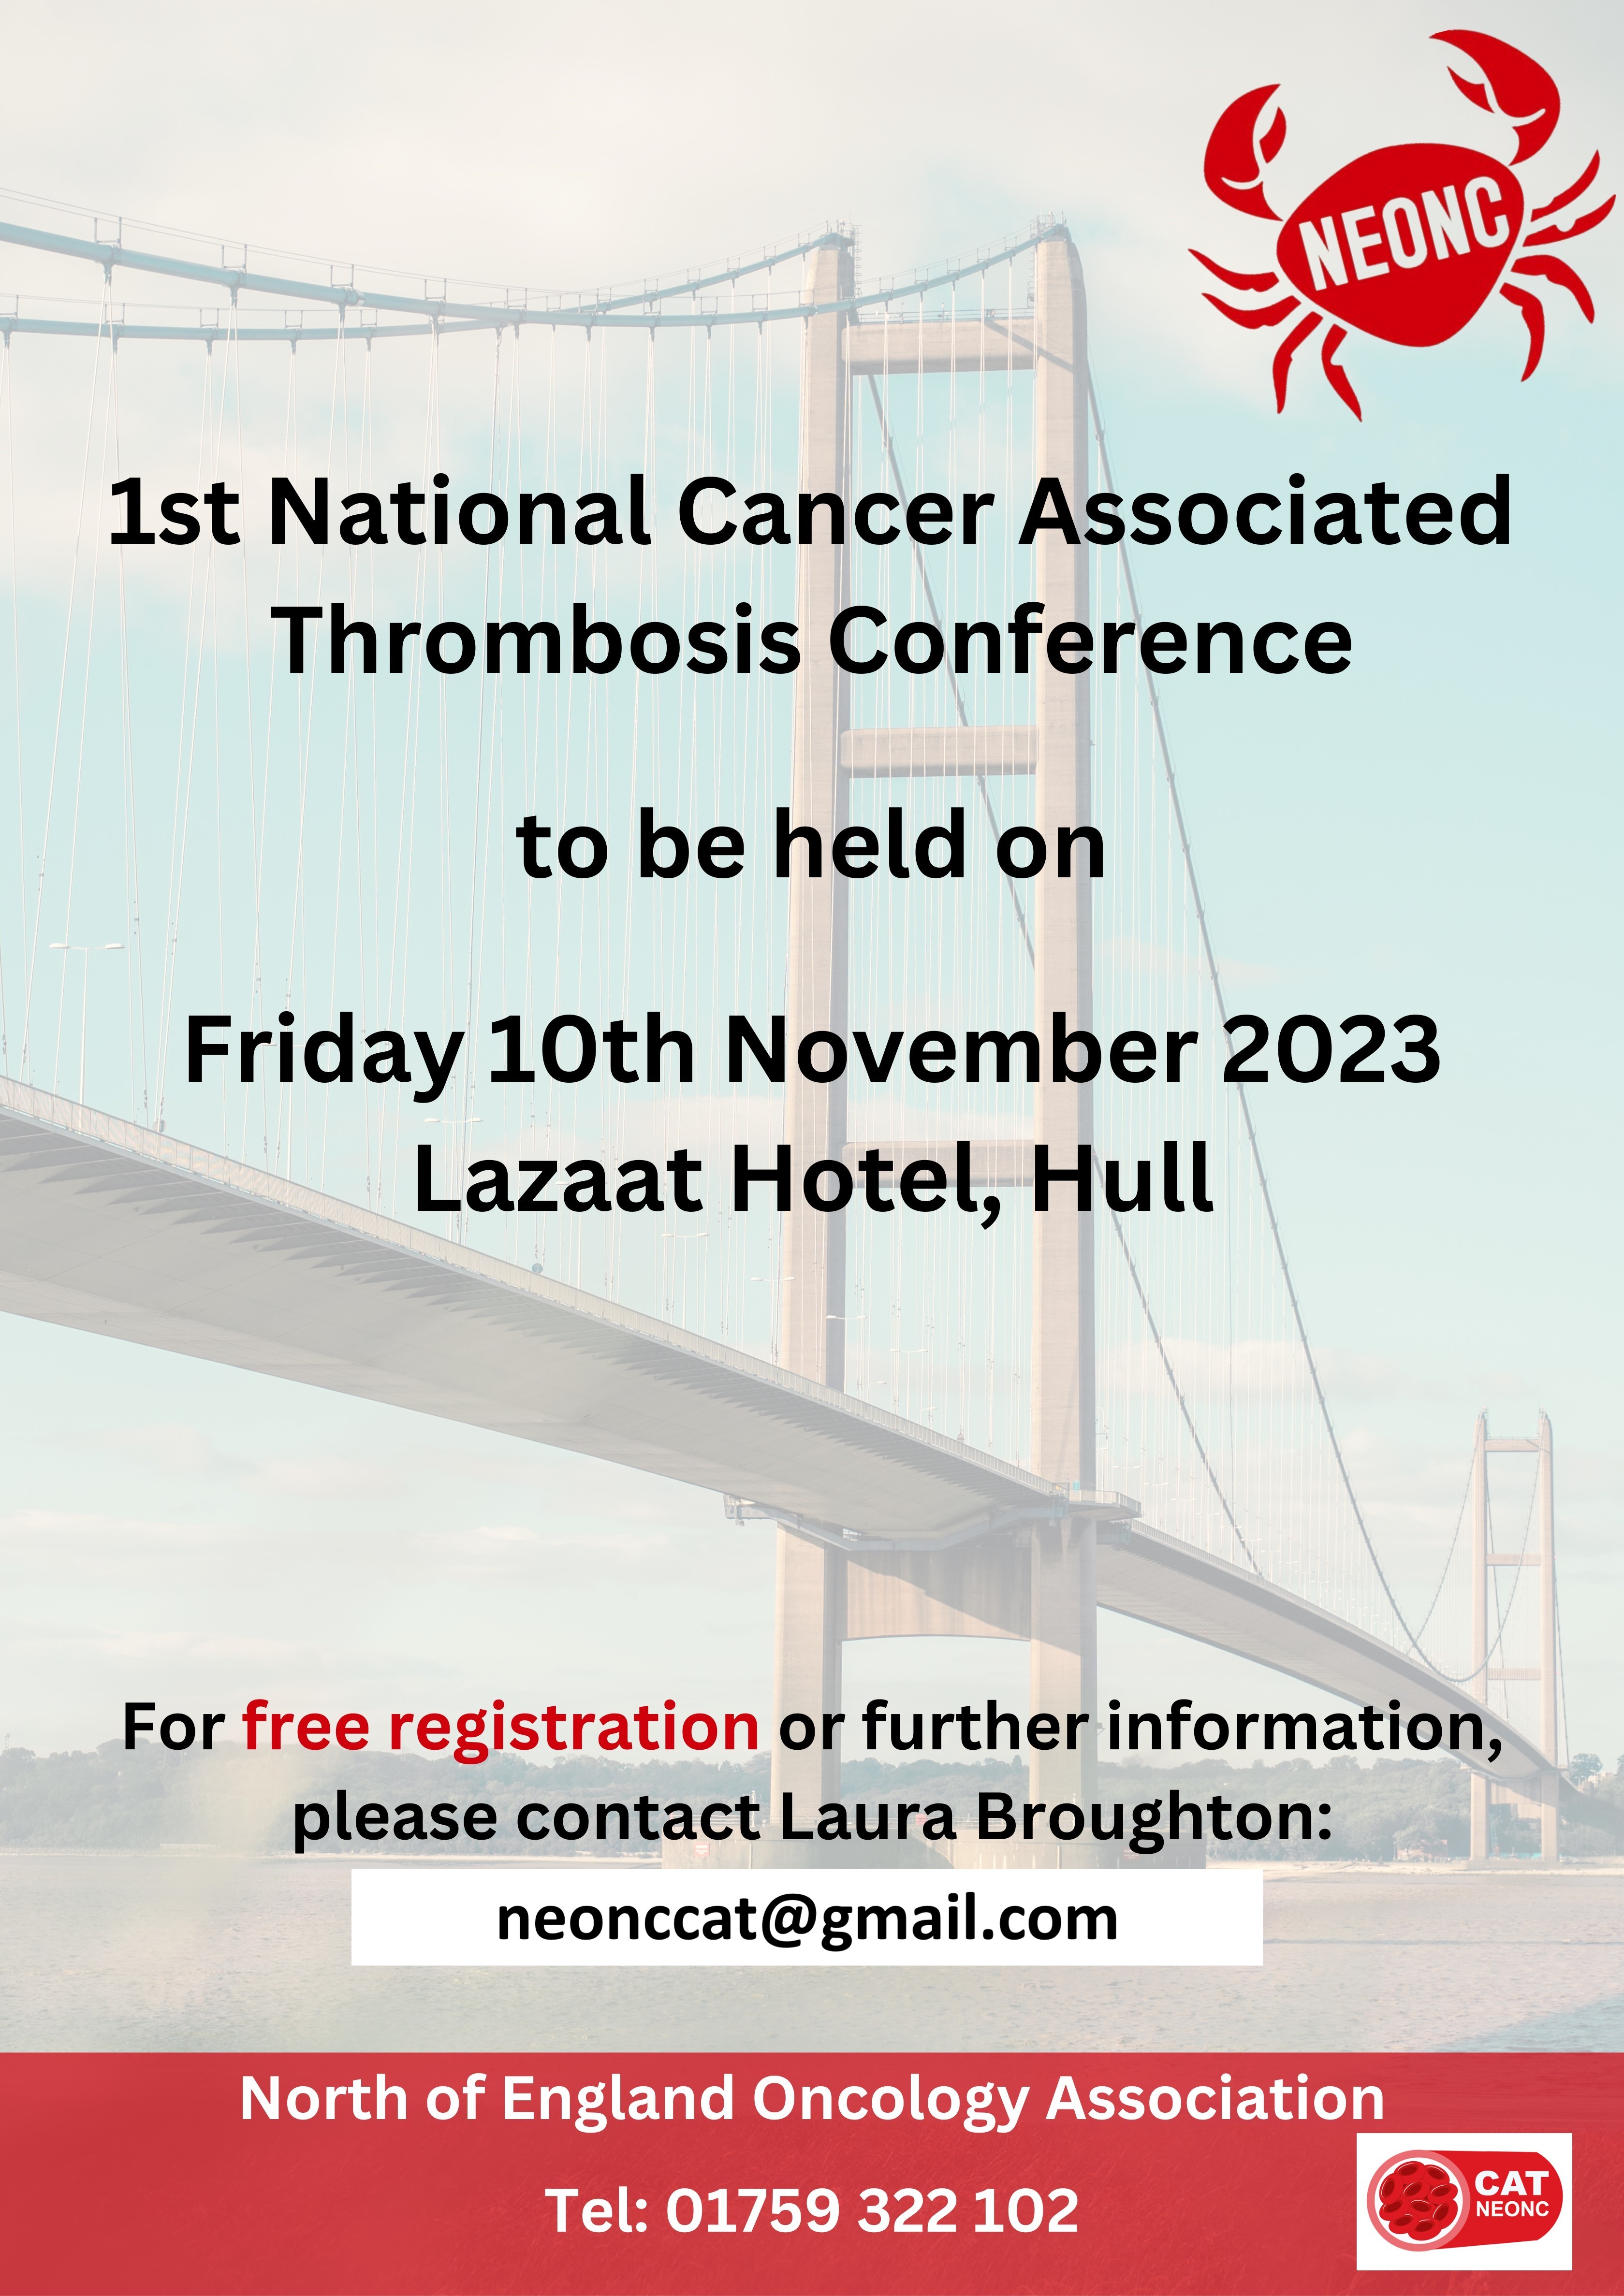 1st National Cancer Associated Thrombosis Conference